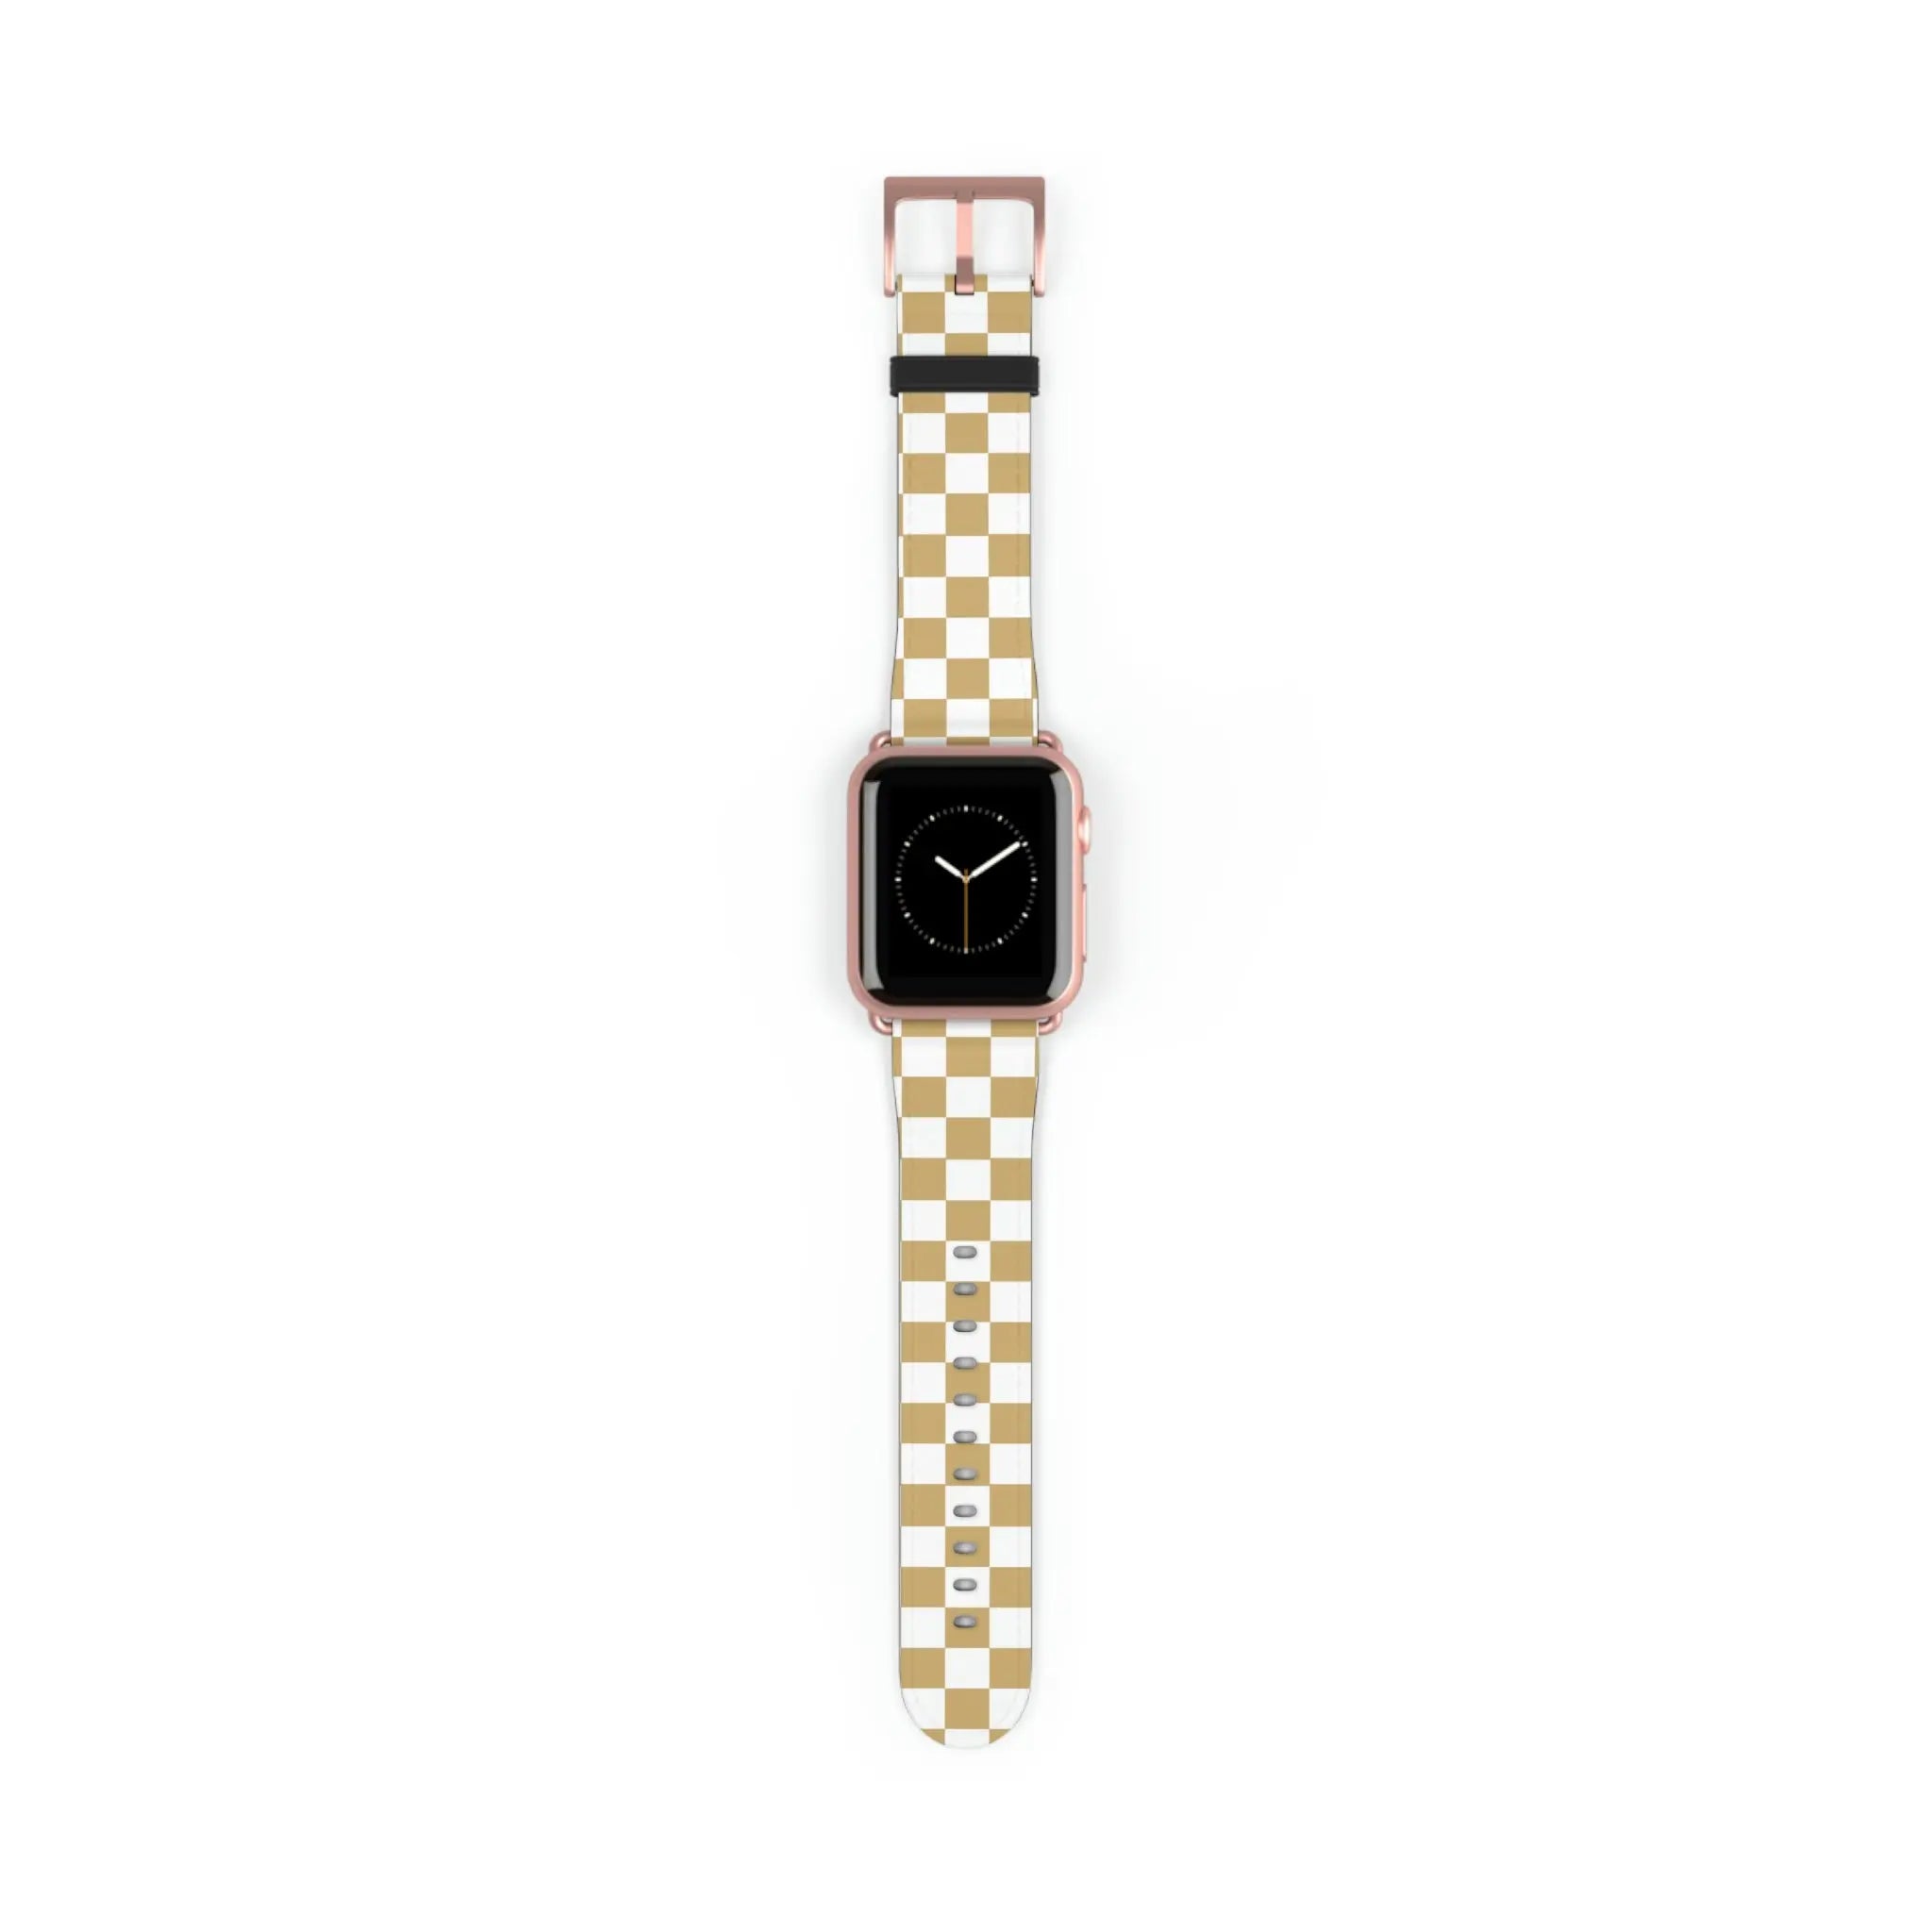  Designer Collection Check Mate (Gold) Watch Band for Apple Watch Accessories38-41mmRoseGoldMatte